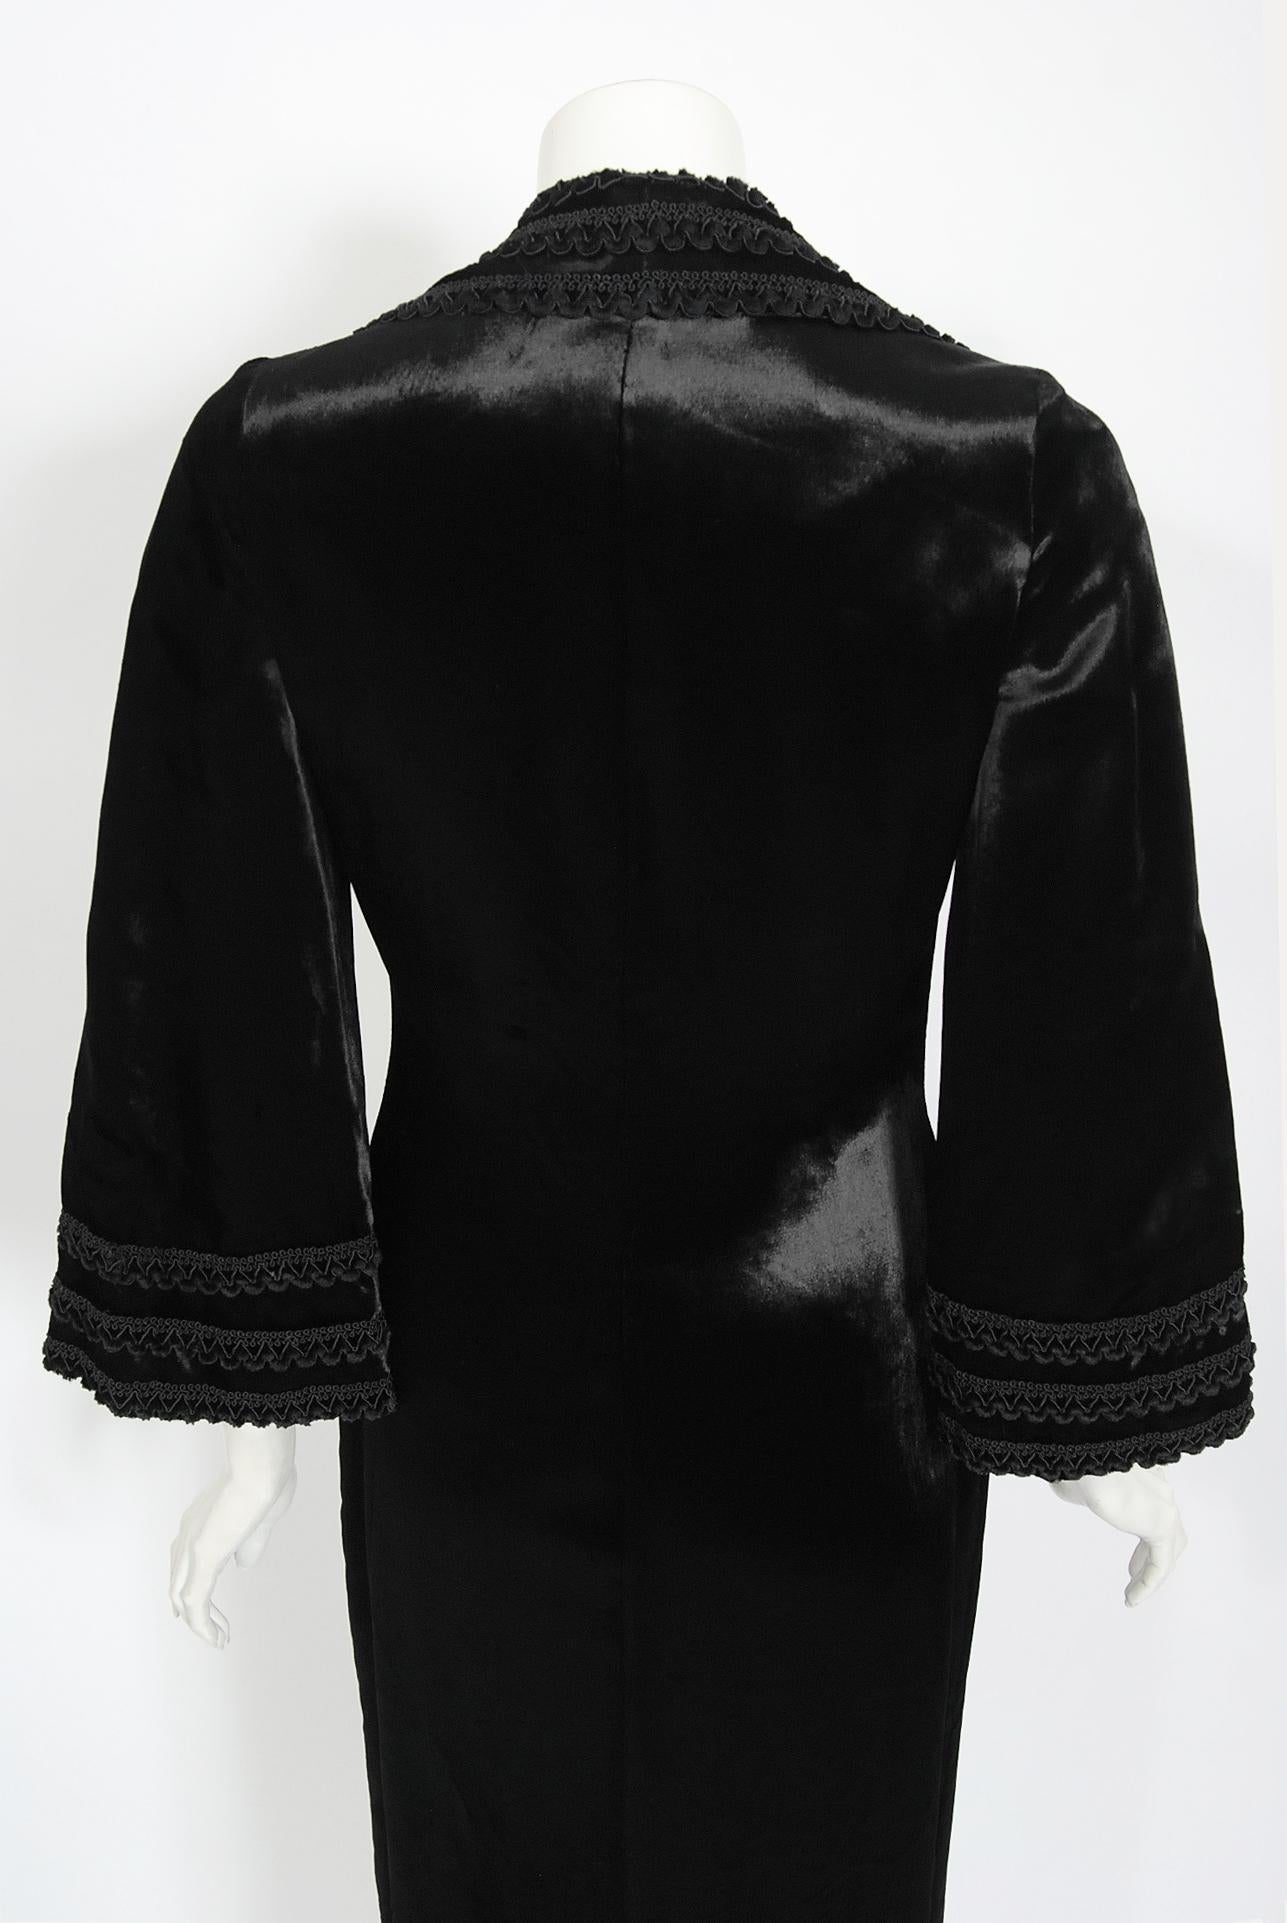 Vintage 1986 Yves Saint Laurent Haute Couture Black Embroidered Pony Hair Jacket 7